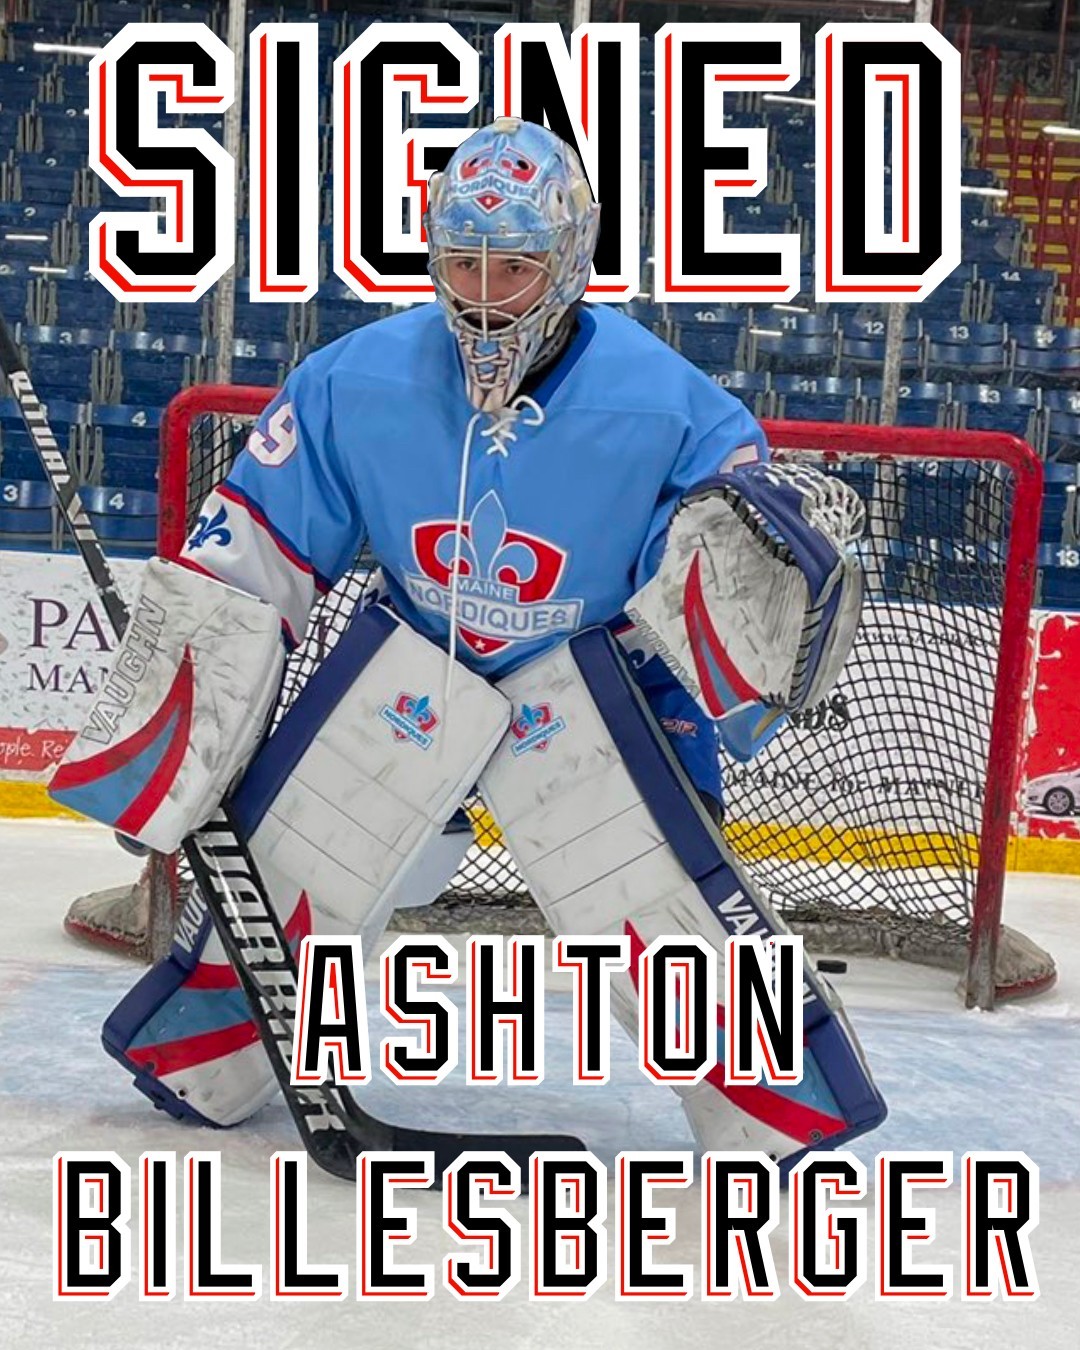 SIGNING! The Cougars have signed Goaltender Ashton Billesberger out of Edmonton. Welcome to the club!